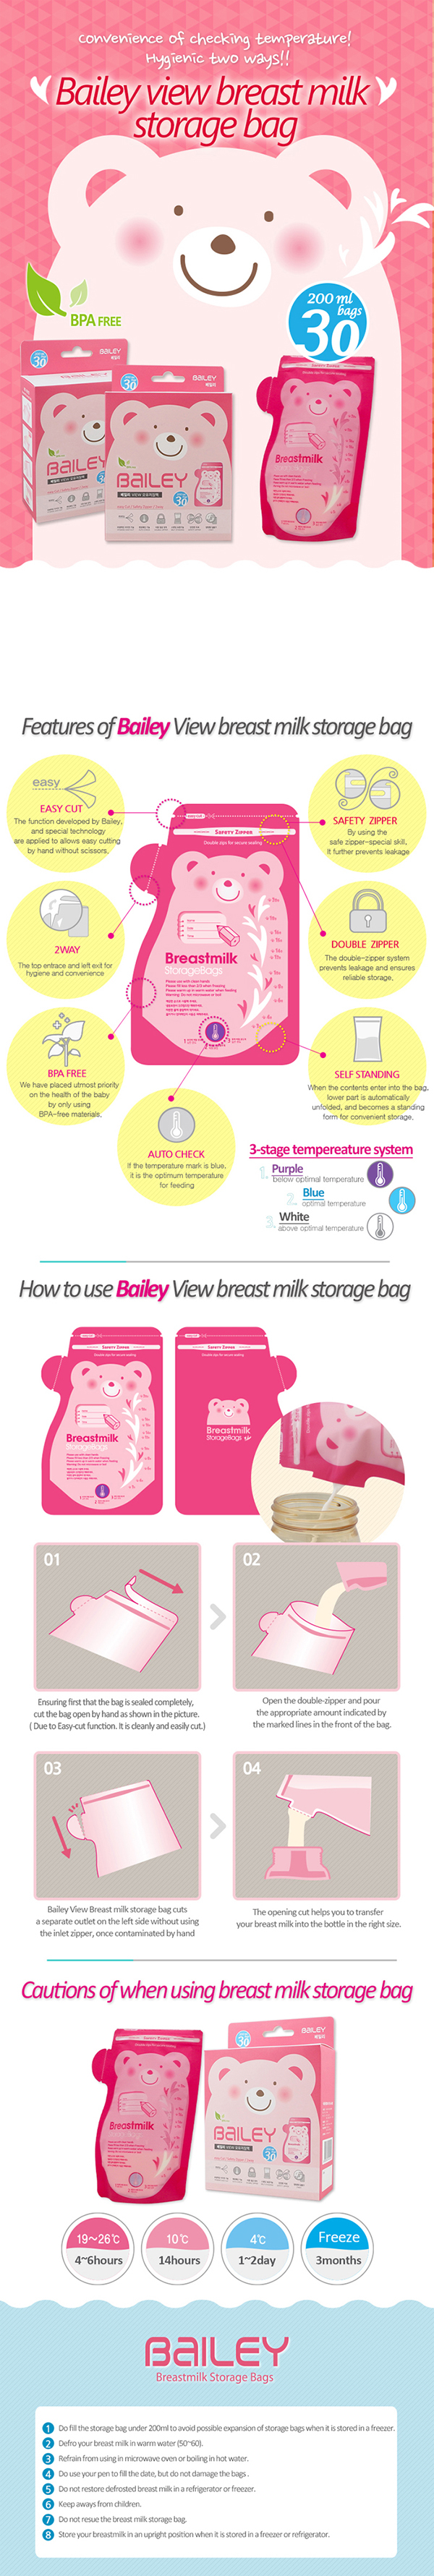 Bailey View Breastmilk Bags with Thermal Sensor is a storage pack that can store breastmilk for long hours by freezing it. 